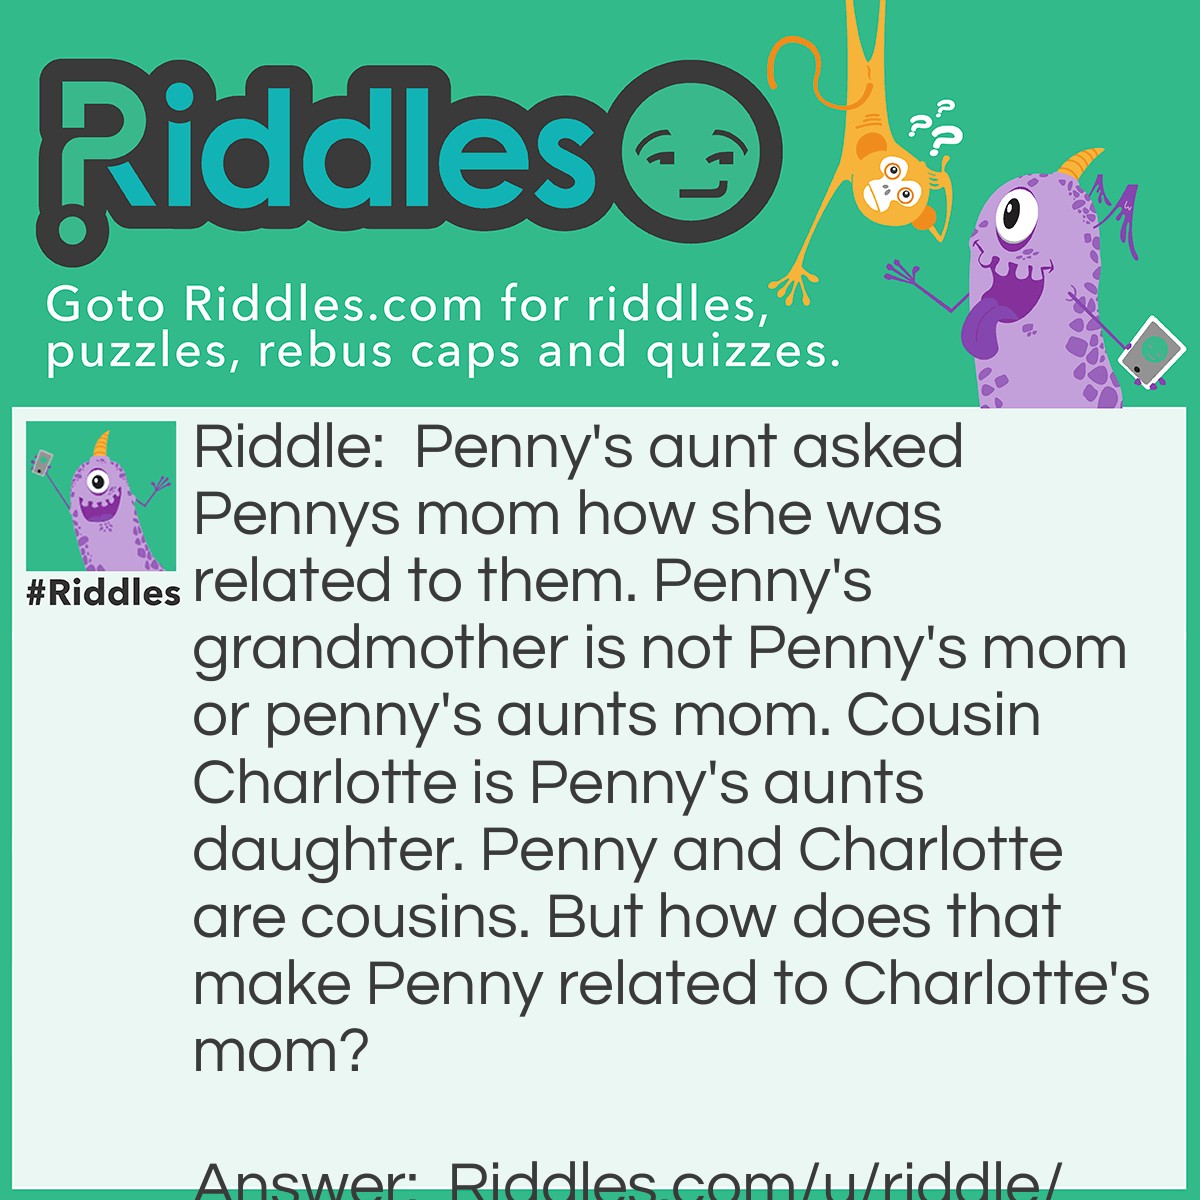 Riddle: Penny's aunt asked Pennys mom how she was related to them. Penny's grandmother is not Penny's mom or penny's aunts mom. Cousin Charlotte is Penny's aunts daughter. Penny and Charlotte are cousins. But how does that make Penny related to Charlotte's mom? Answer: Penny's aunt is her dad's sister.